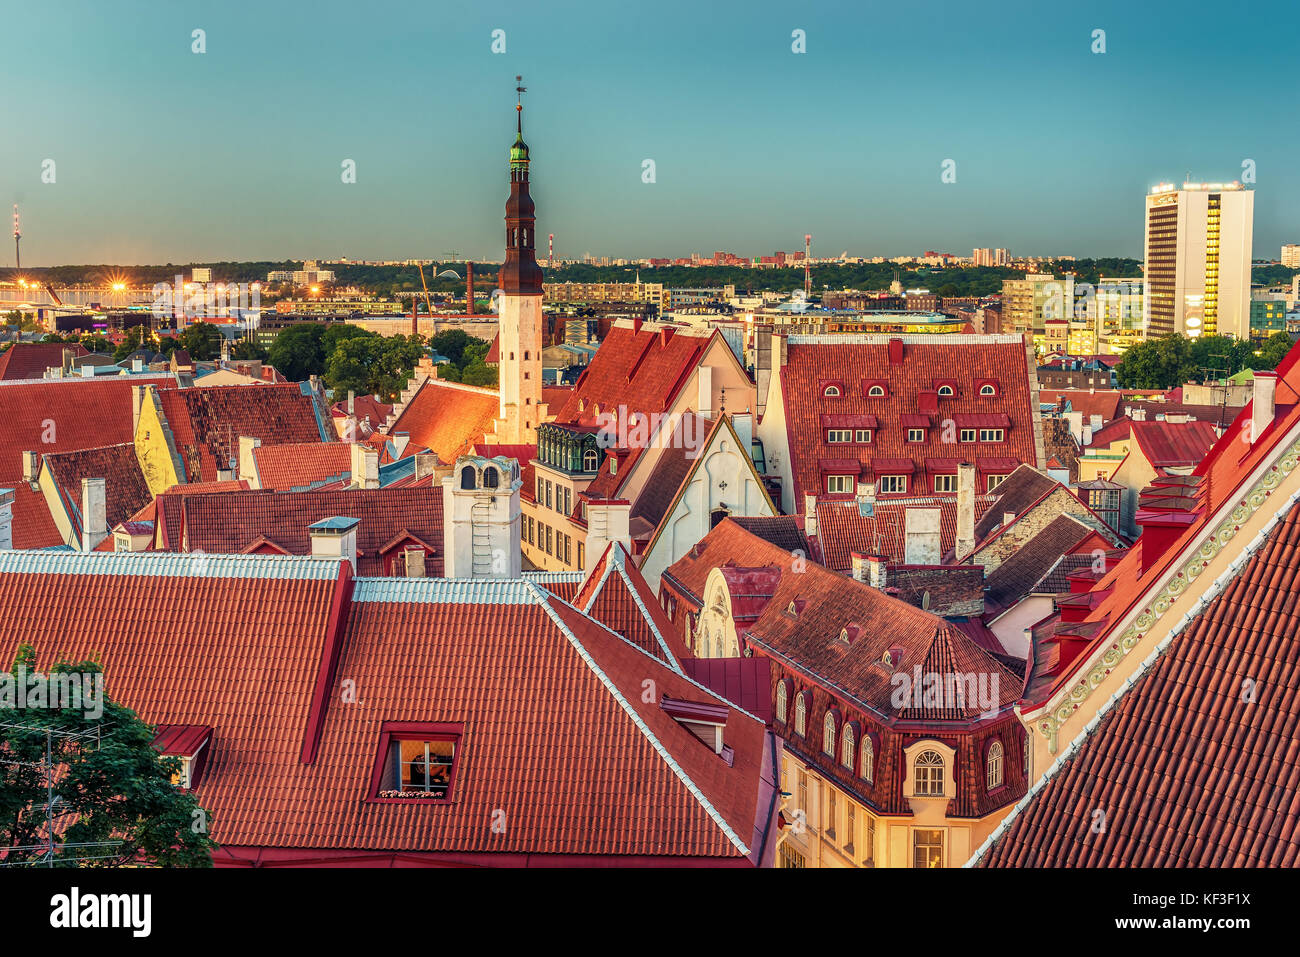 Tallinn, Estonia: aerial top view of the old town at night Stock Photo